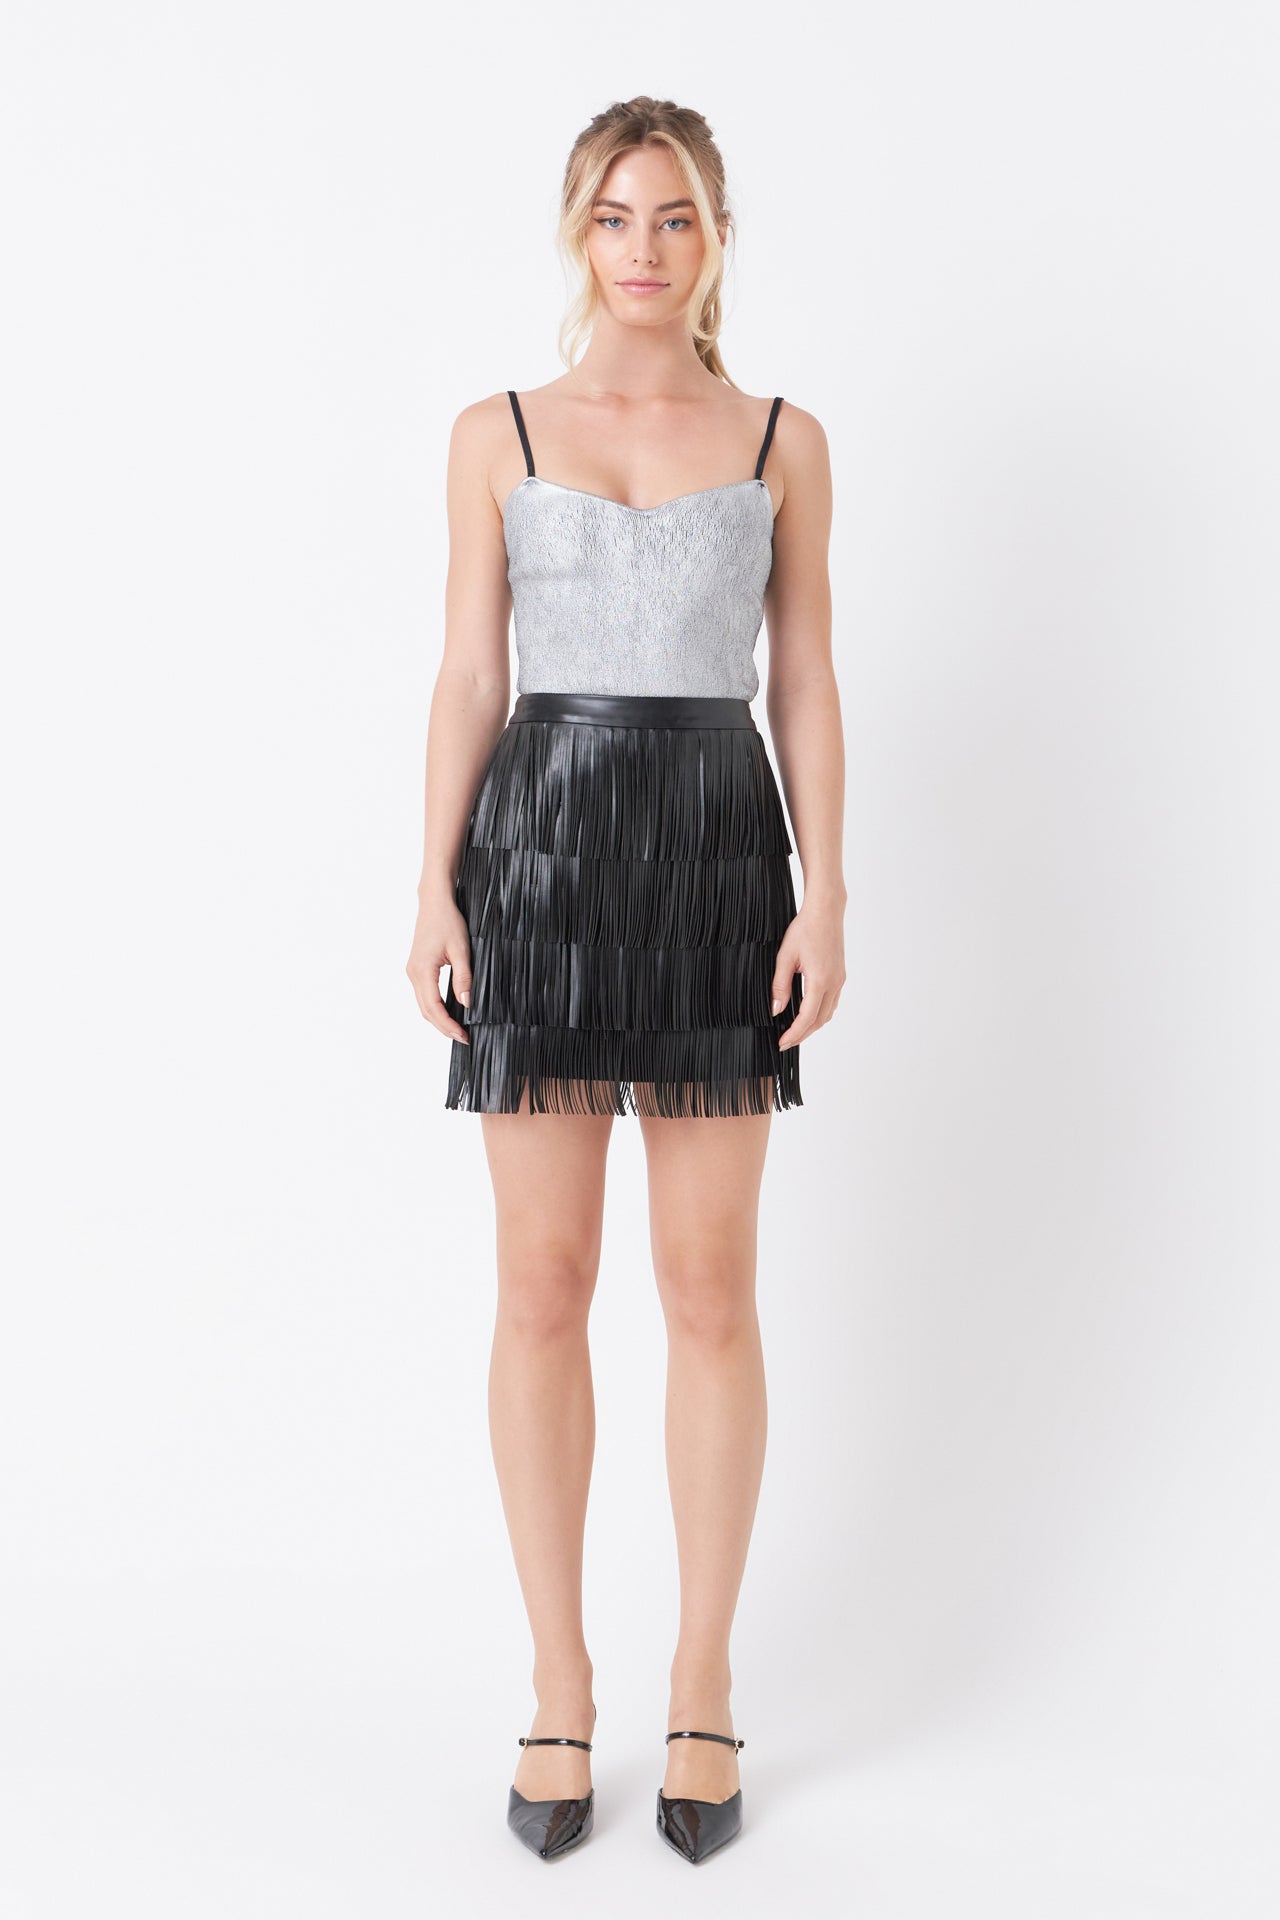 Endless Rose - Leather Fringe Mini Skirt - Skirts in Women's Clothing available at endlessrose.com